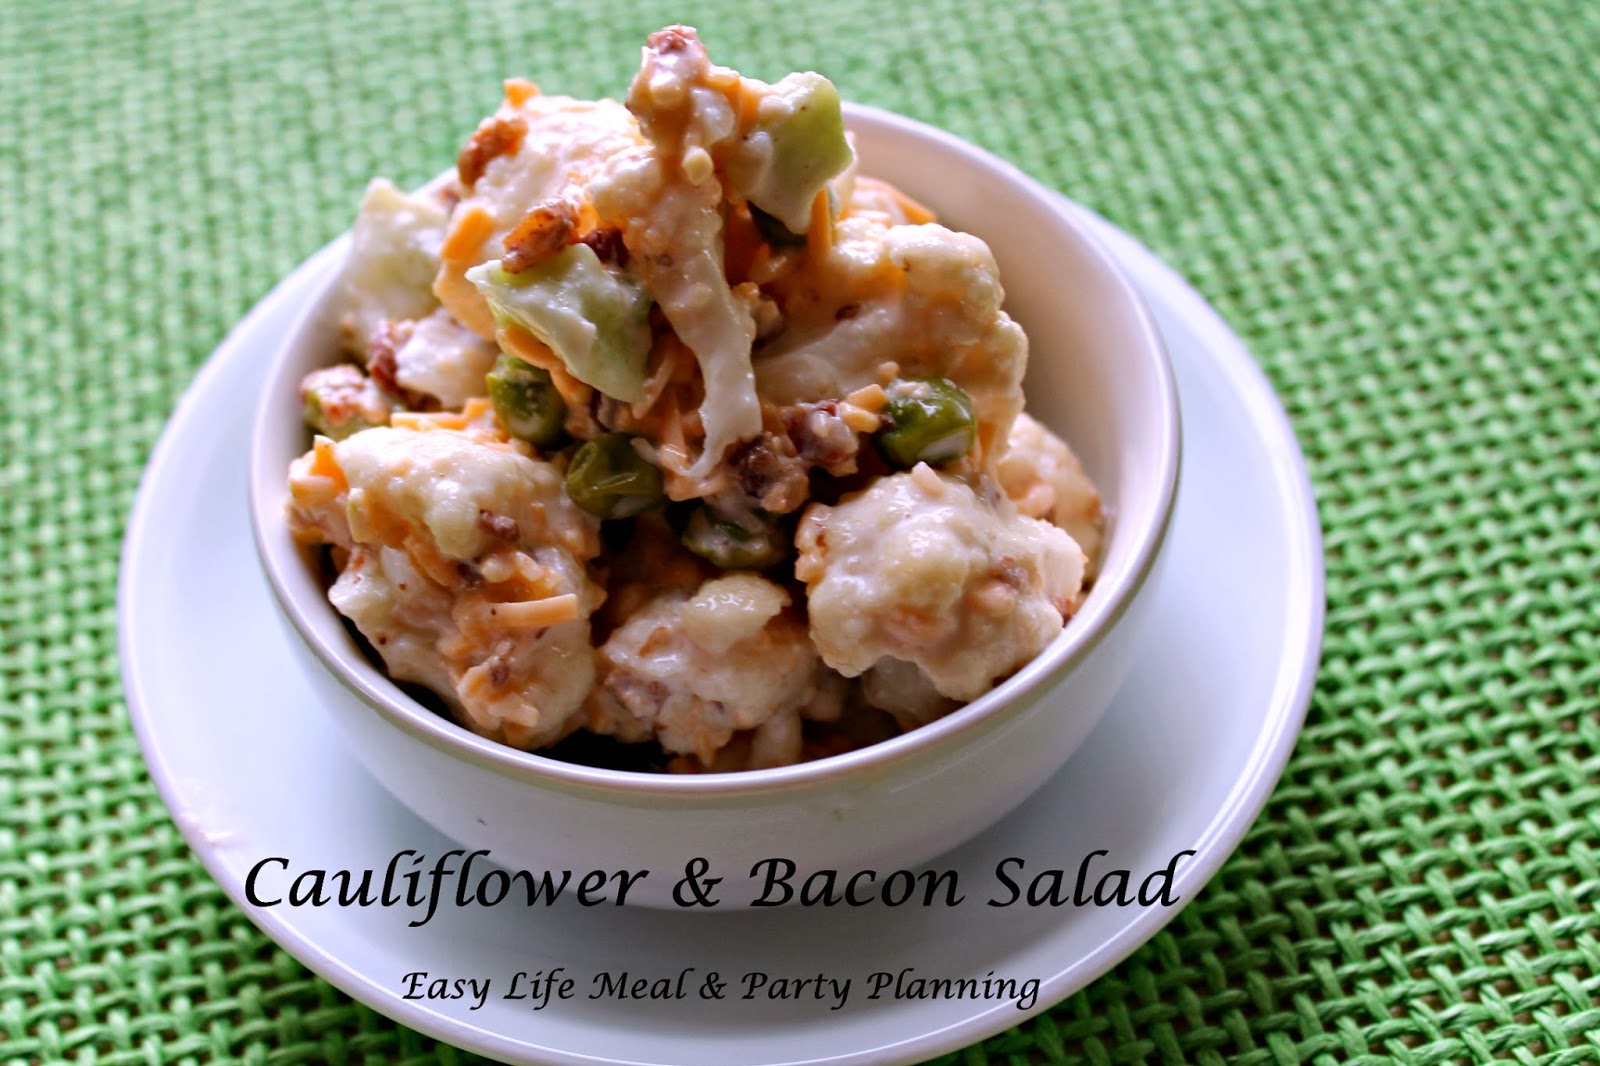 Easy Cauliflower & Bacon Salad - Easy Life Meal & Party Planning - A wonderful creamy salad filled with cauliflower, bacon, cucumber, cheese & a sprinkling of peas!